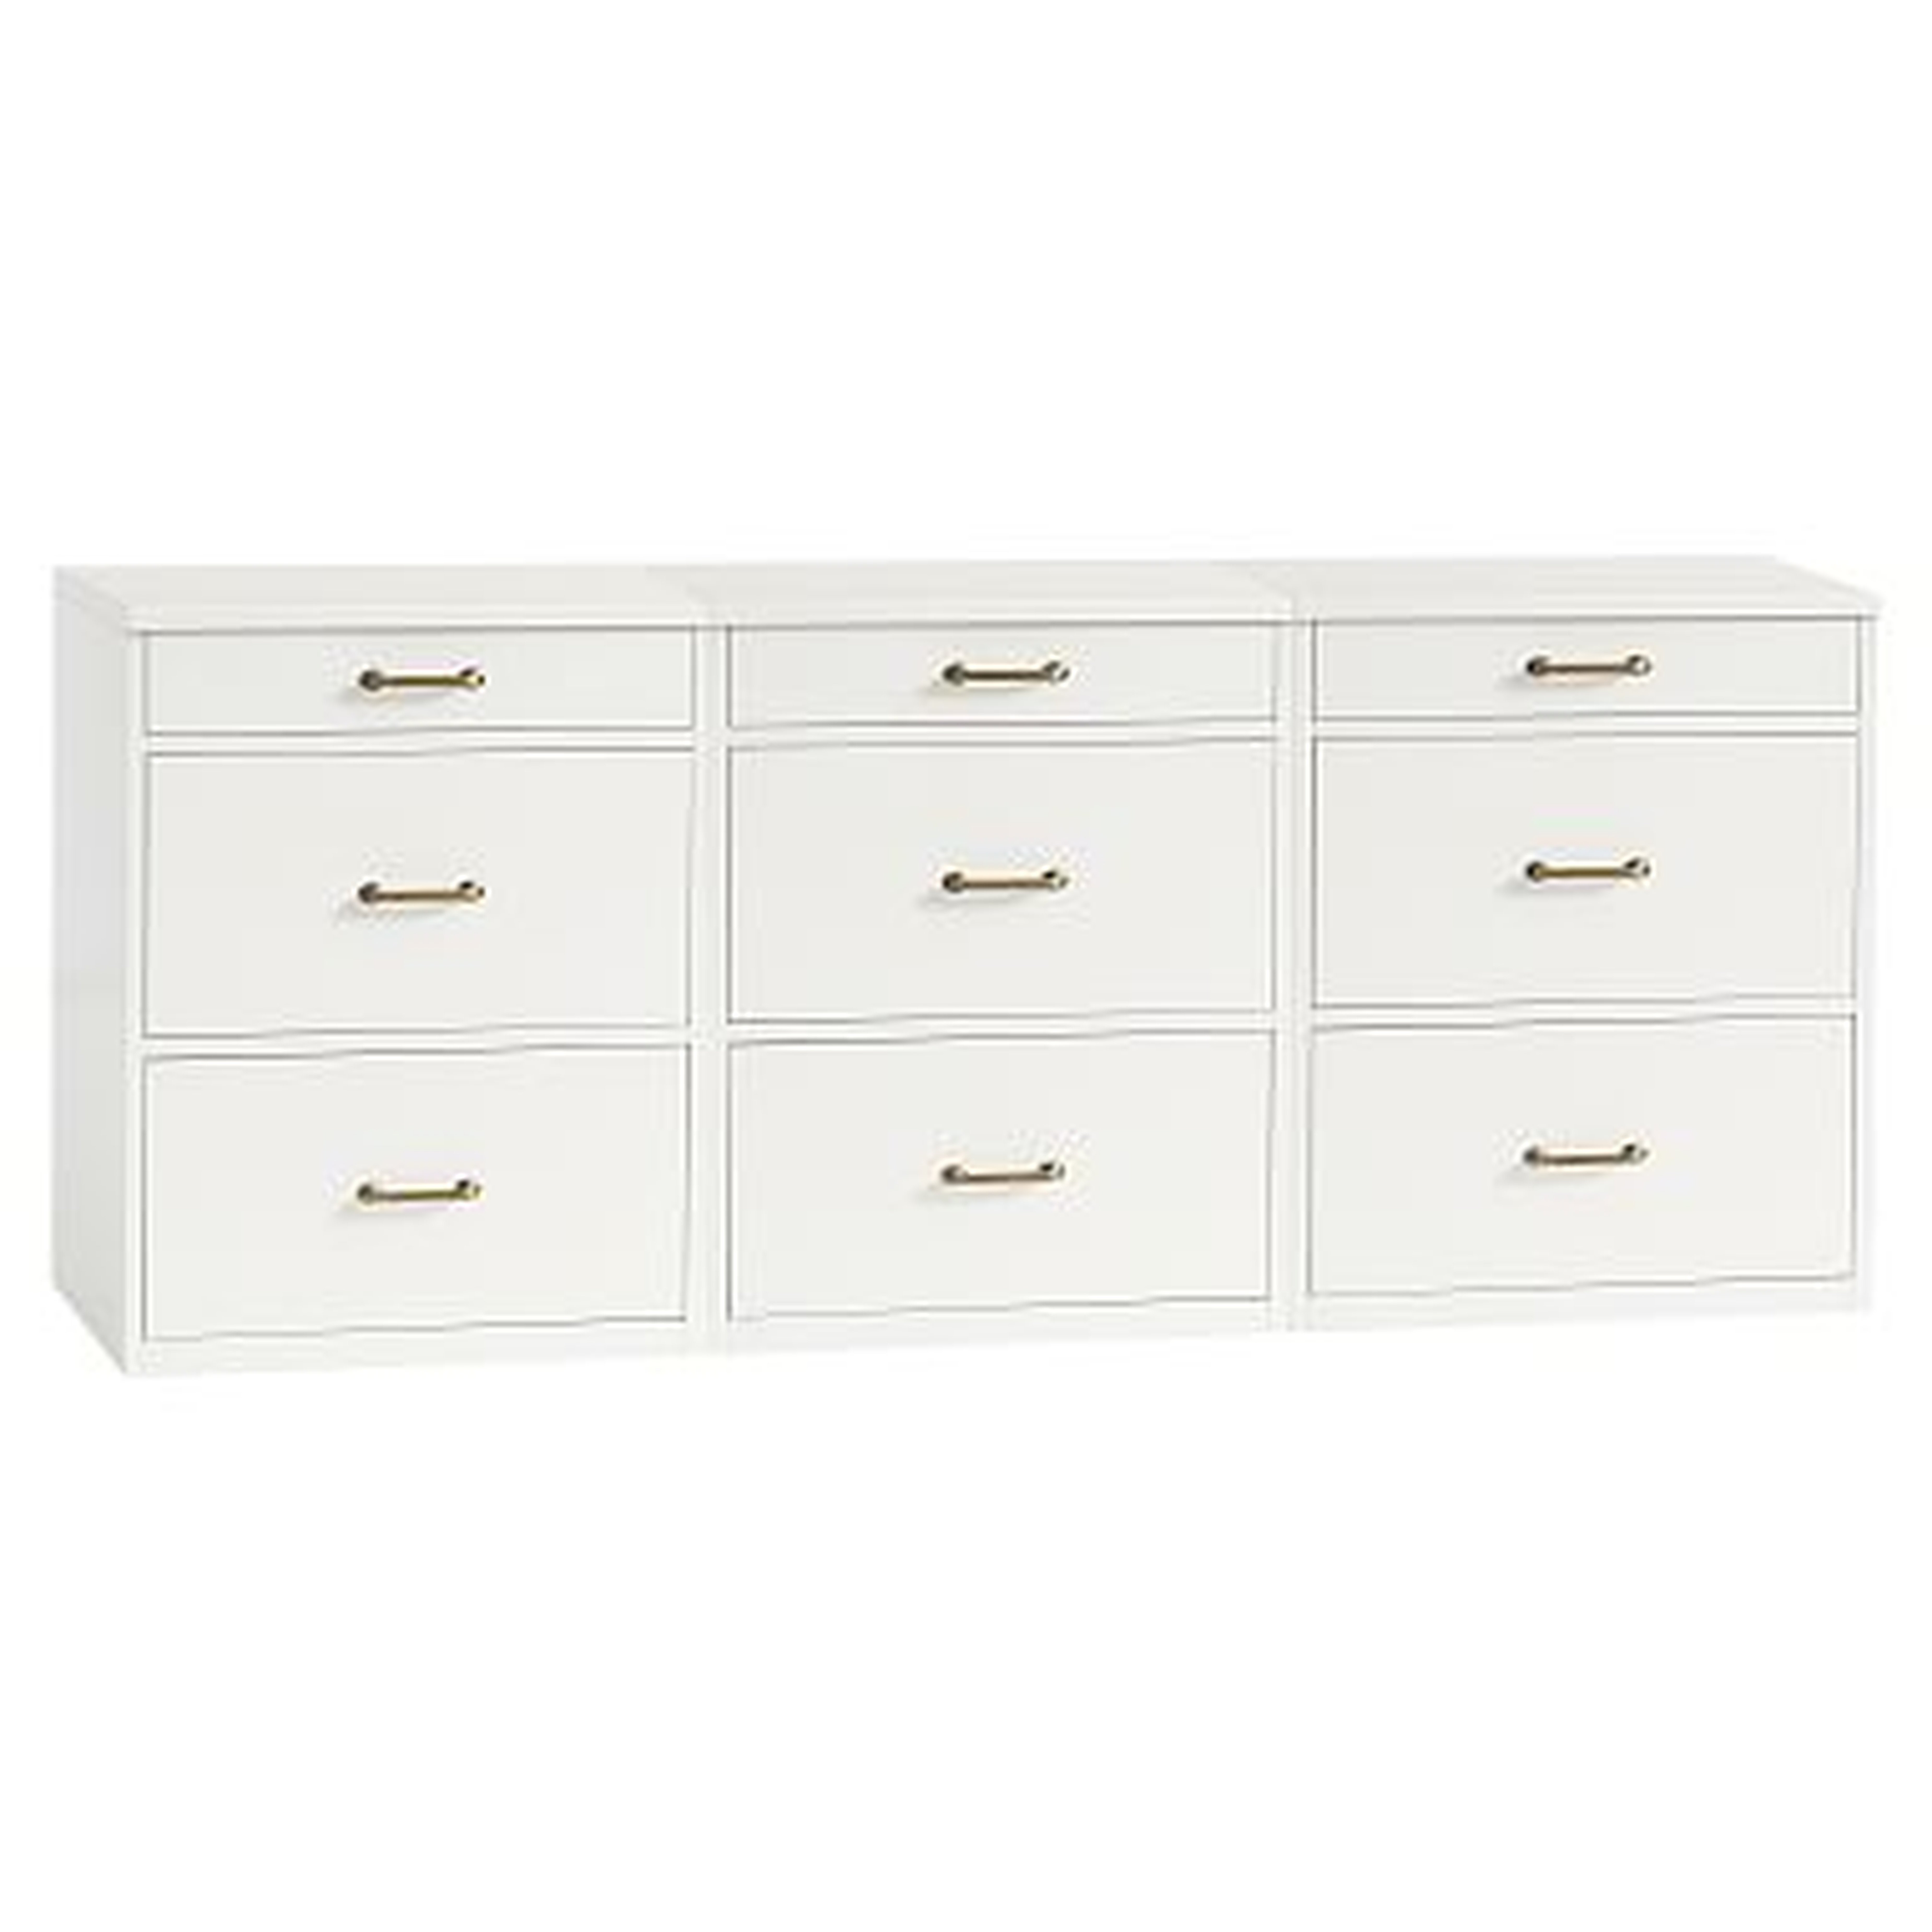 Waverly Triple Chest Set, Water-Based Simply White - Pottery Barn Teen